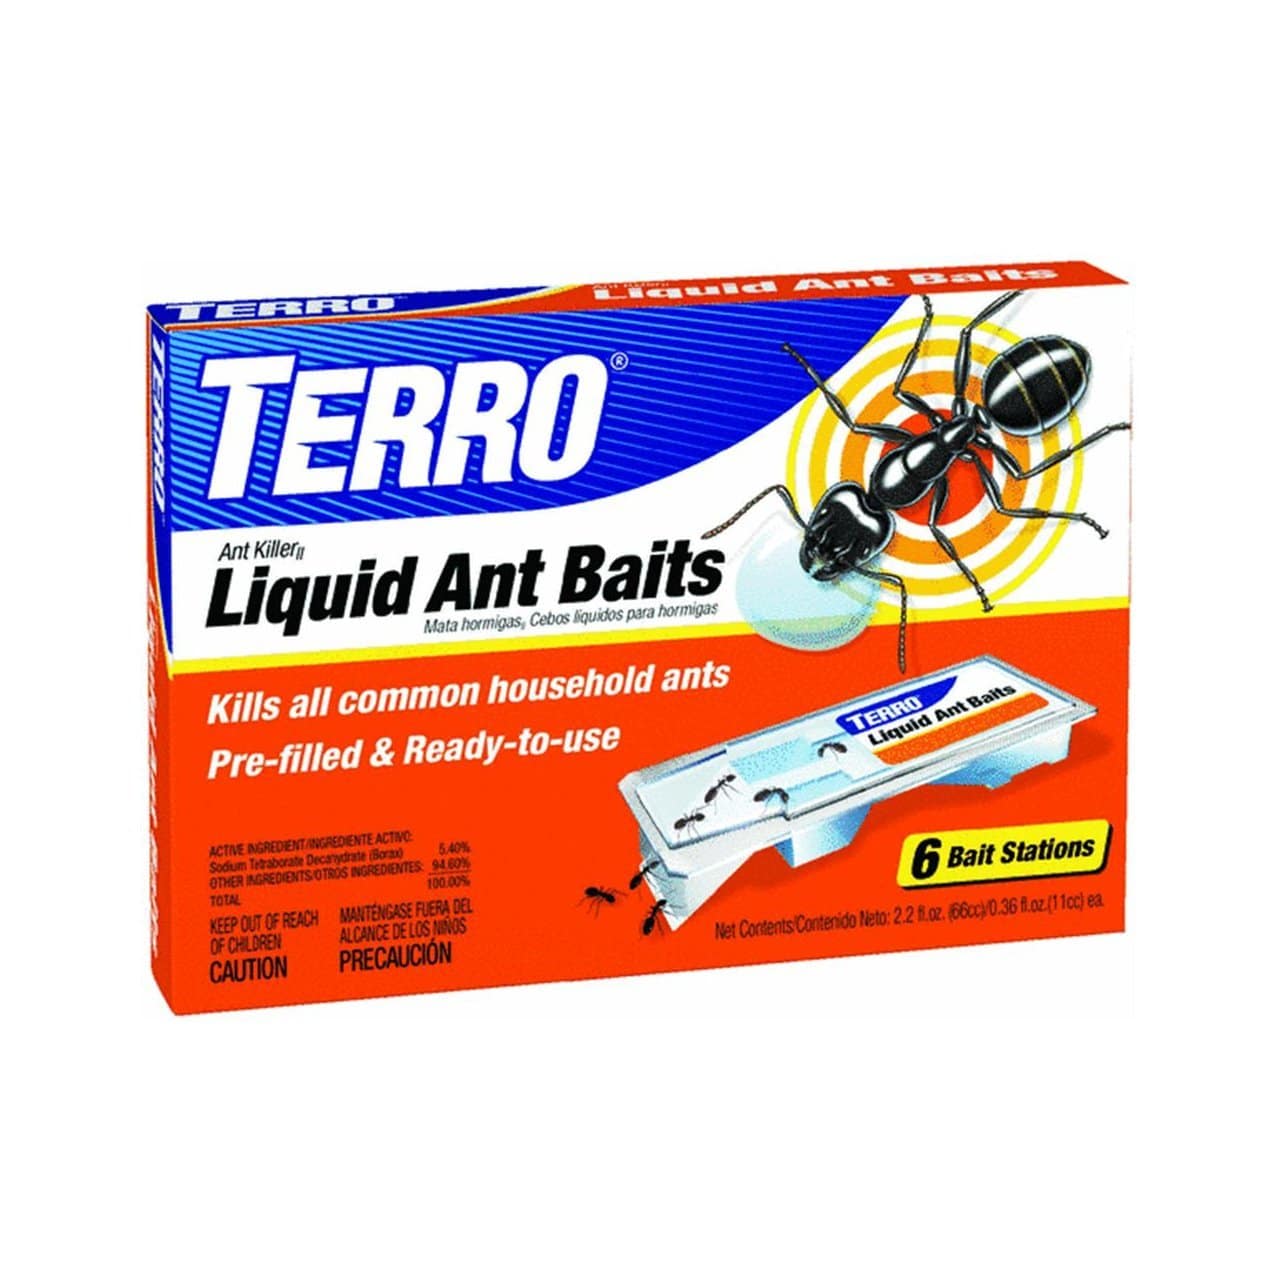 Getting Rid of Sugar Ants in the House